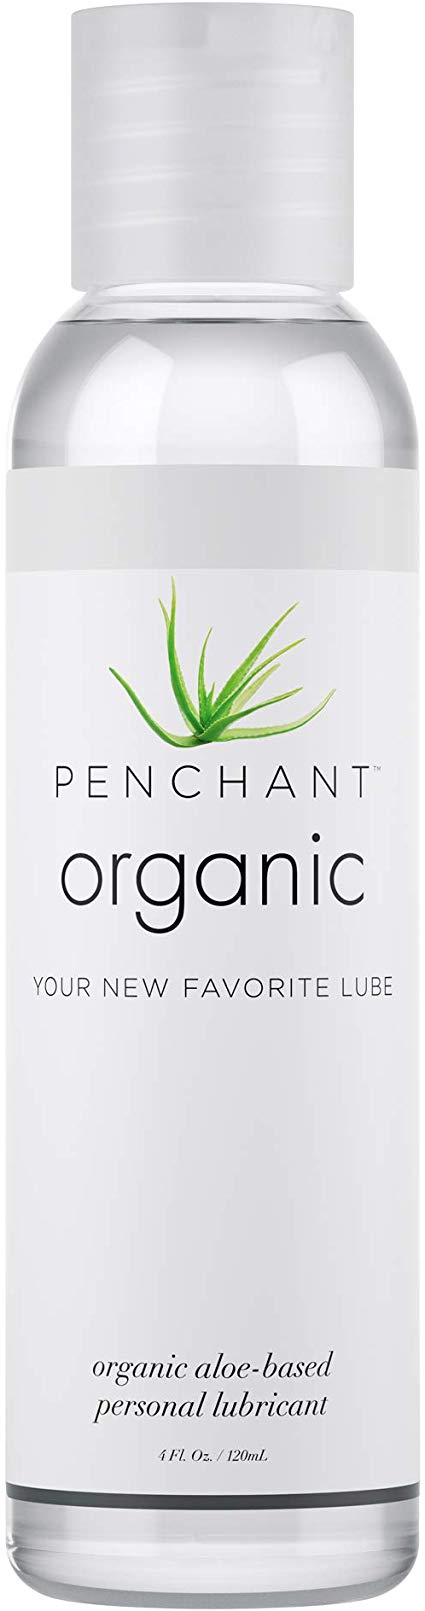 Organic Lubricant for Sensitive Skin by Penchant - Aloe Based, Discreet Label - Best Personal Lube for Women and Men – Lubrication Gel Without Parabens or Glycerin 4oz